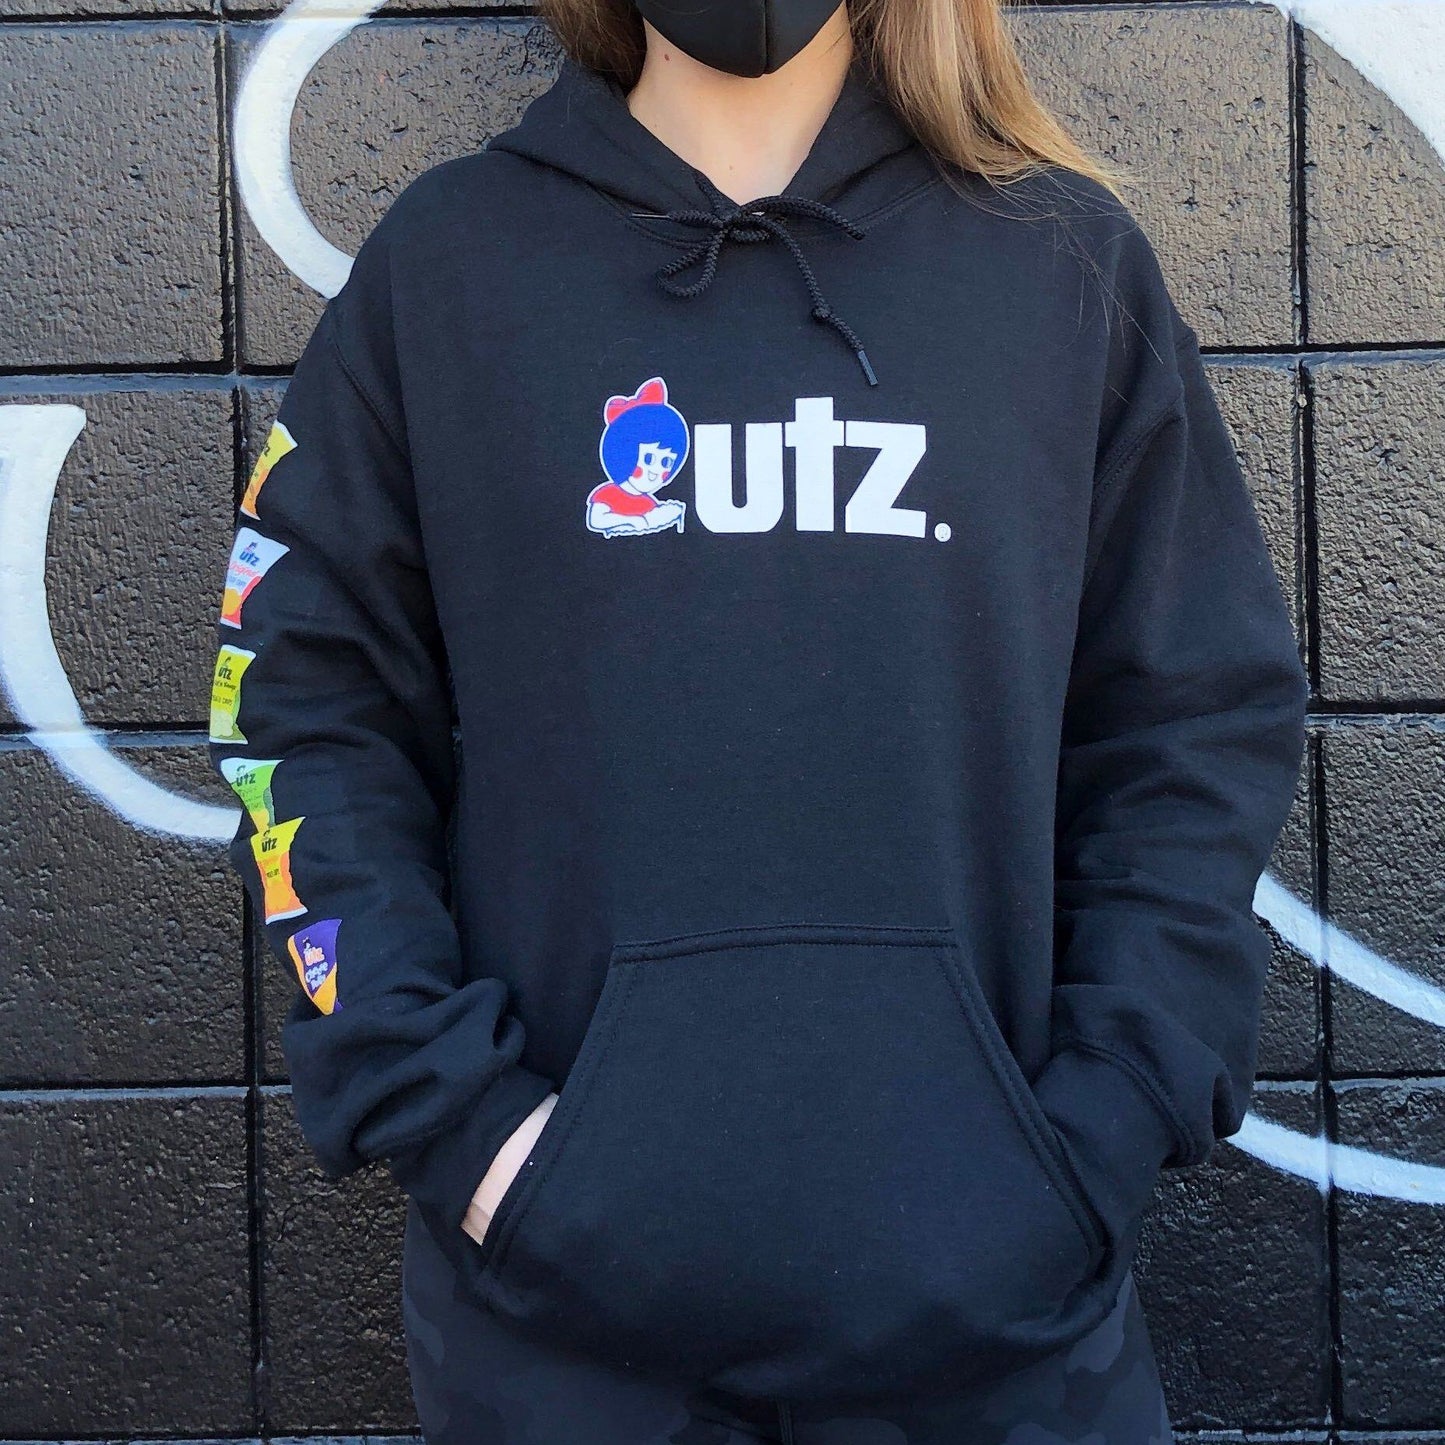 Utz Logo and Chip Bags Sleeve (Black) / Hoodie - Route One Apparel